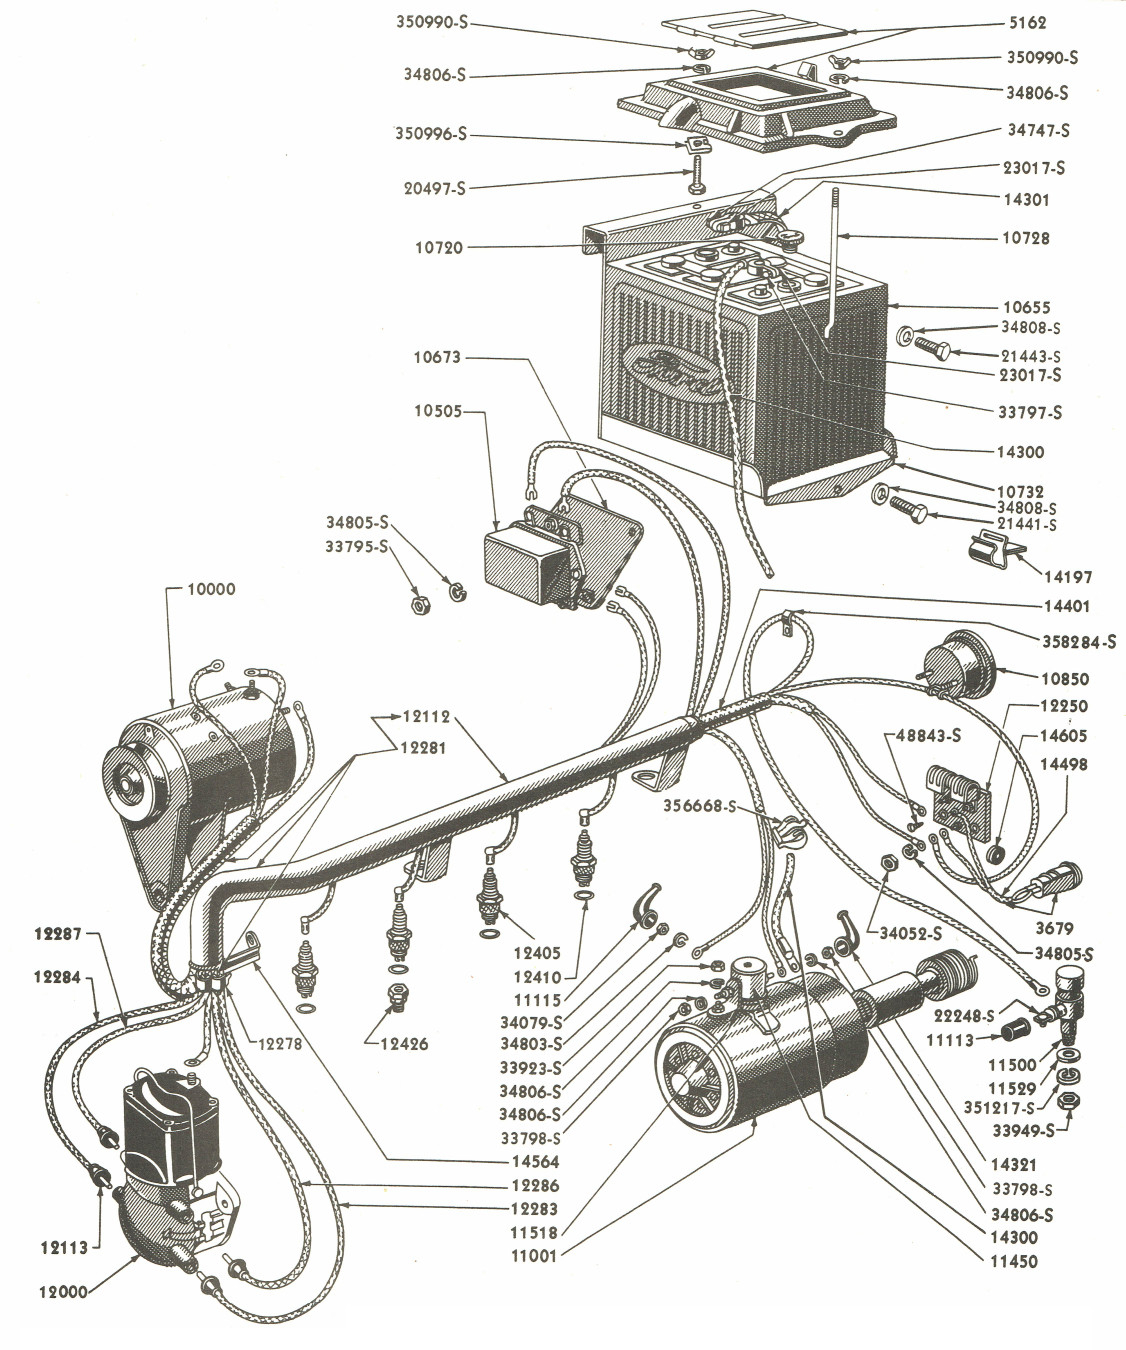 1941 Ford Wiring Diagram | Wiring Library - 9N Ford Tractor Wiring Diagram